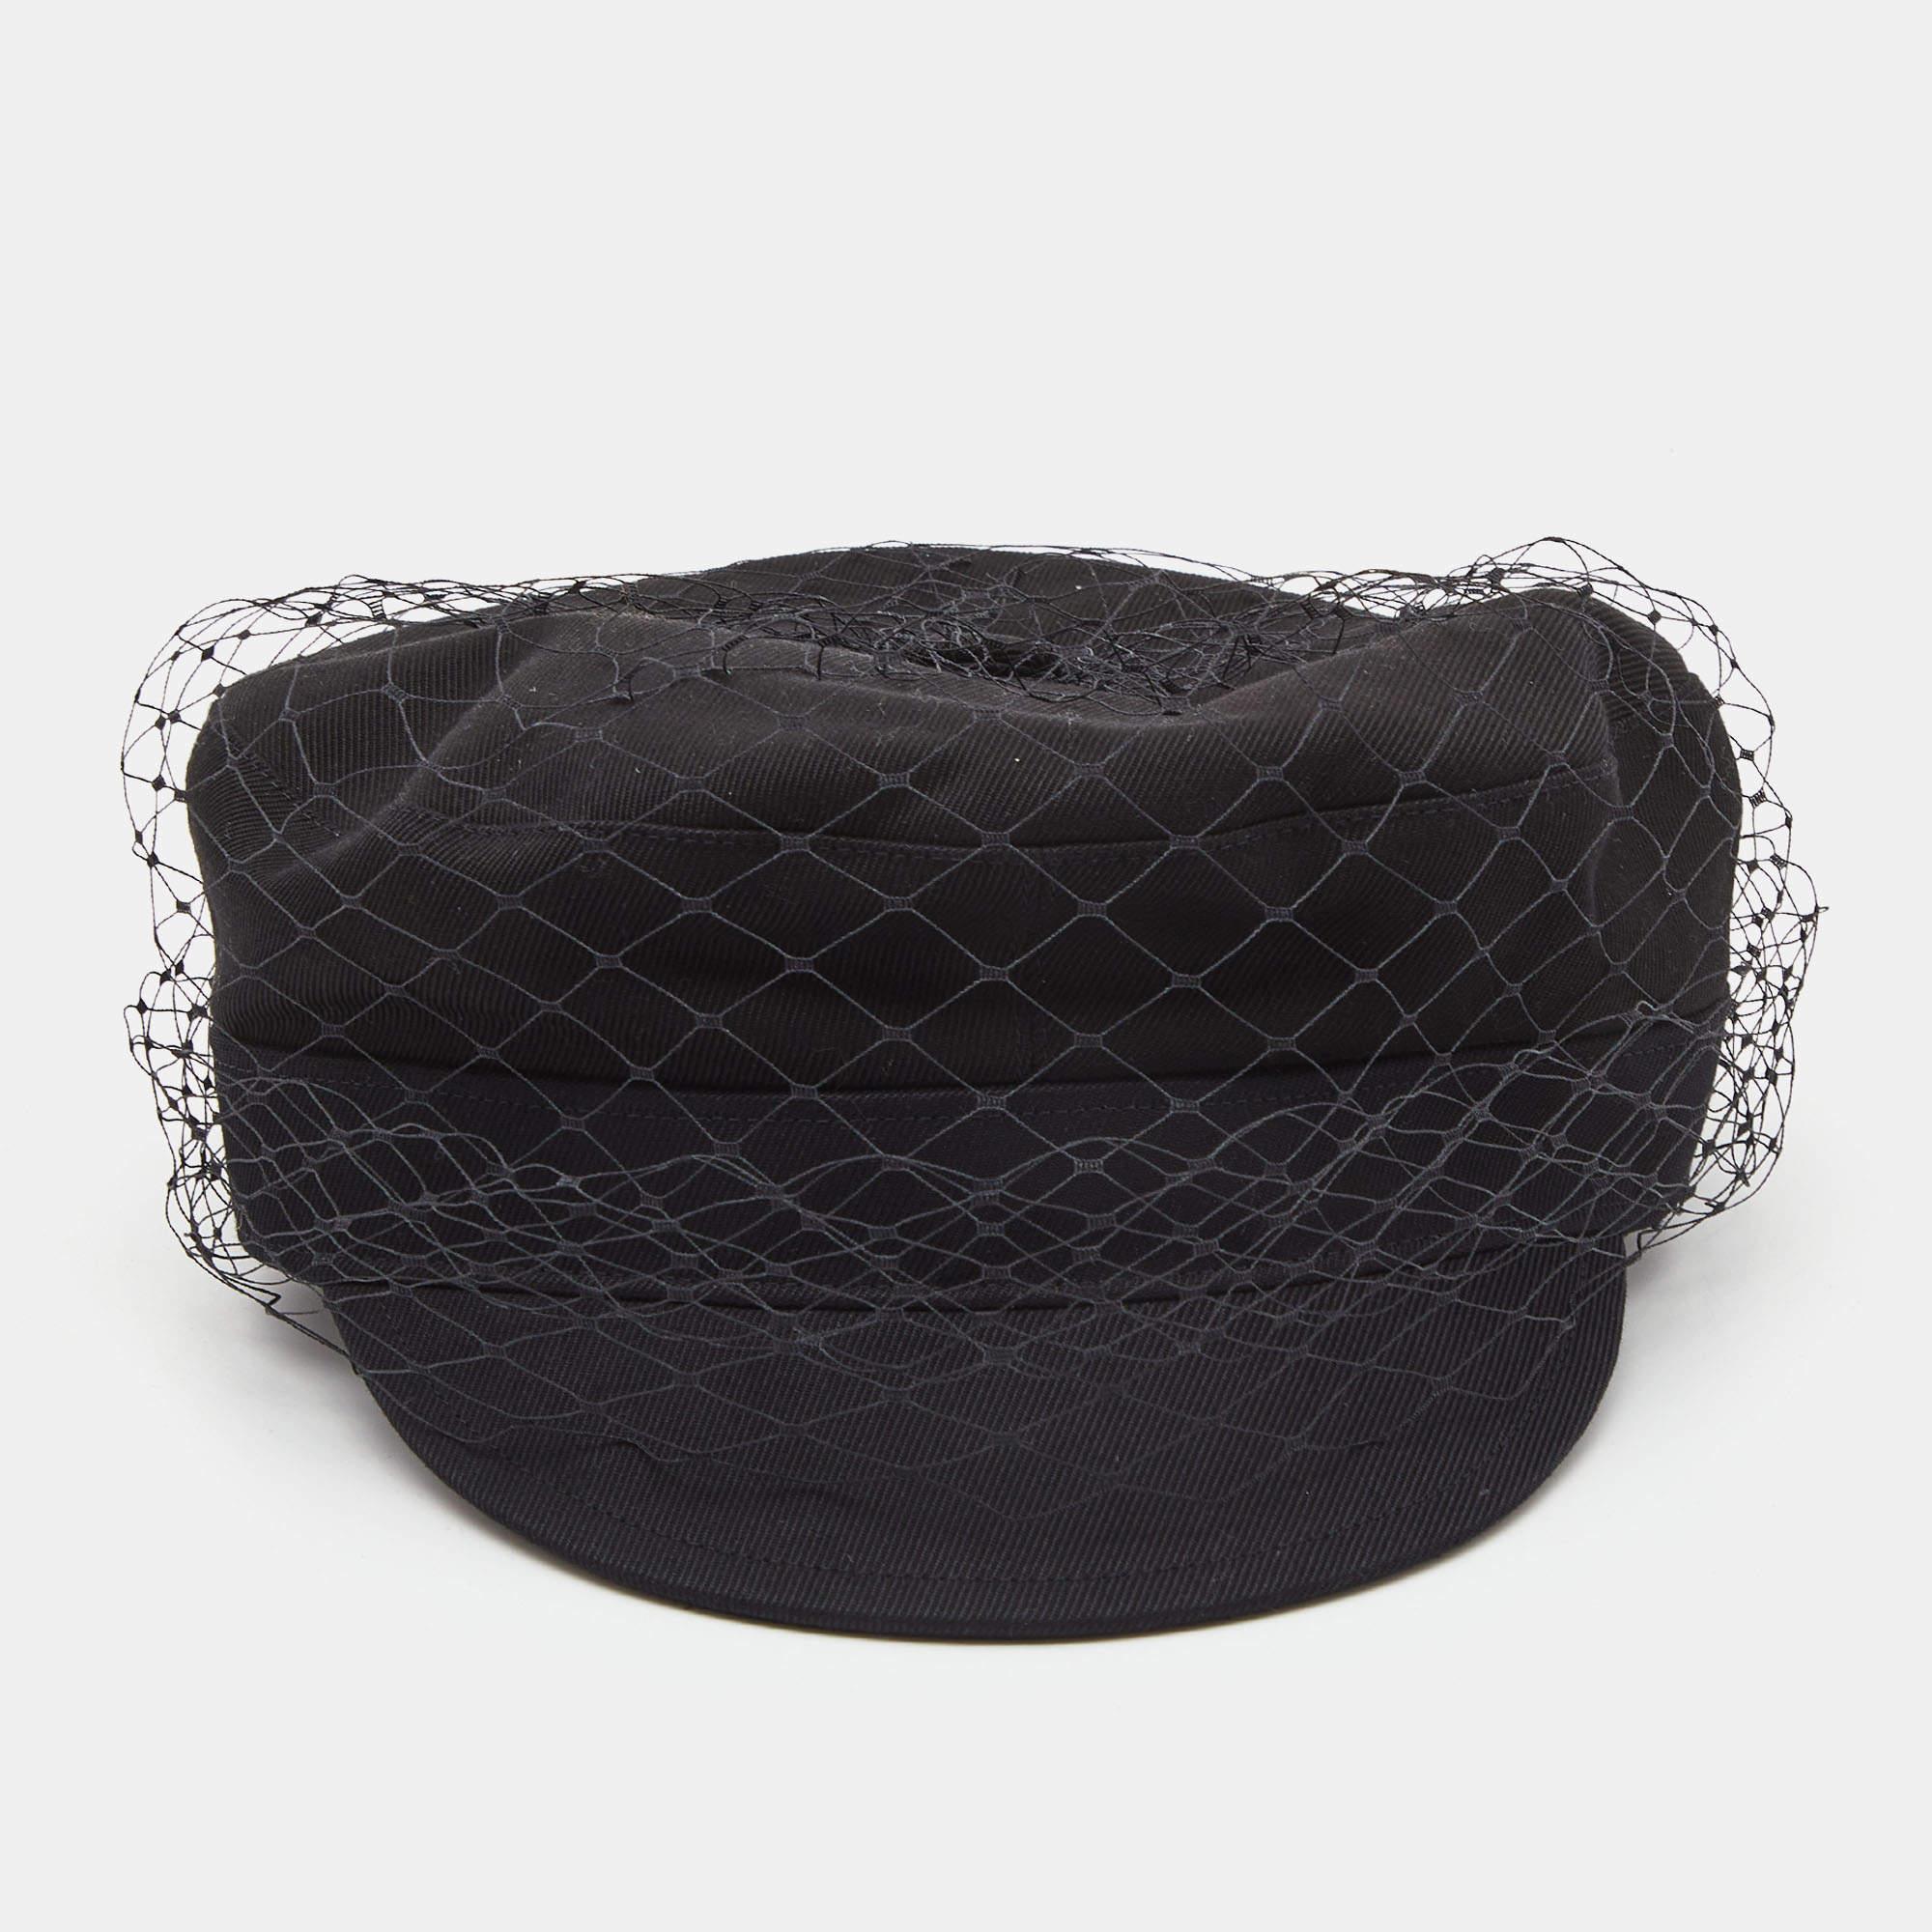 Let style rule your daily wardrobe. Dior brings this extremely chic cap crafted out of lightweight cotton, with a mesh veil covering it all over and the brand logo at the rear. A must-have accessory indeed!

